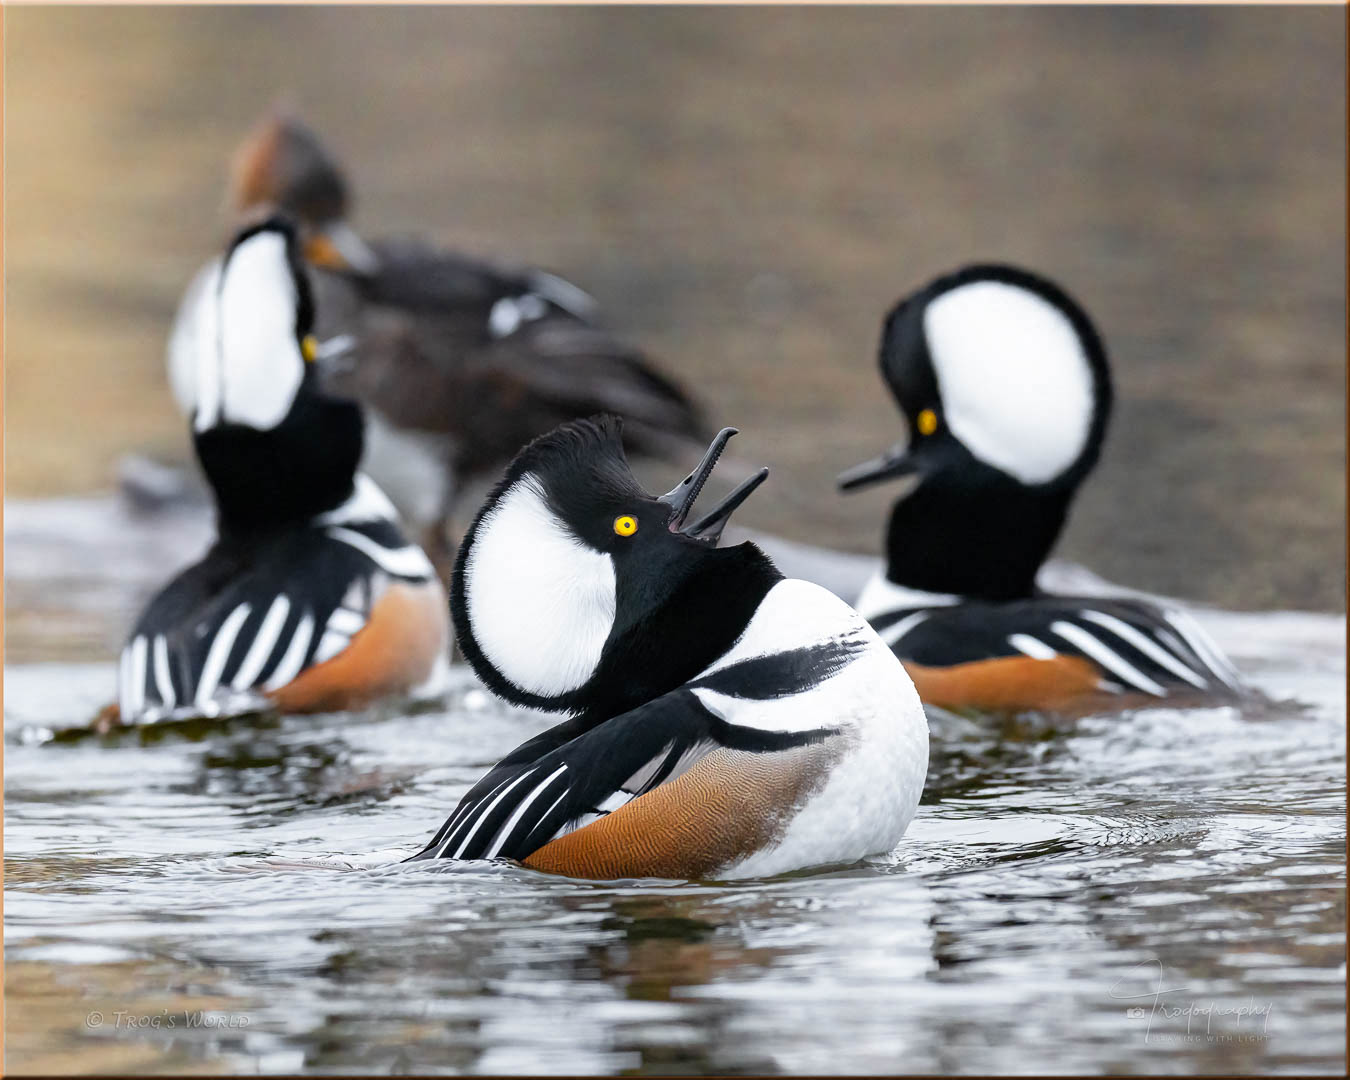 Hooded Mergansers courting a lady